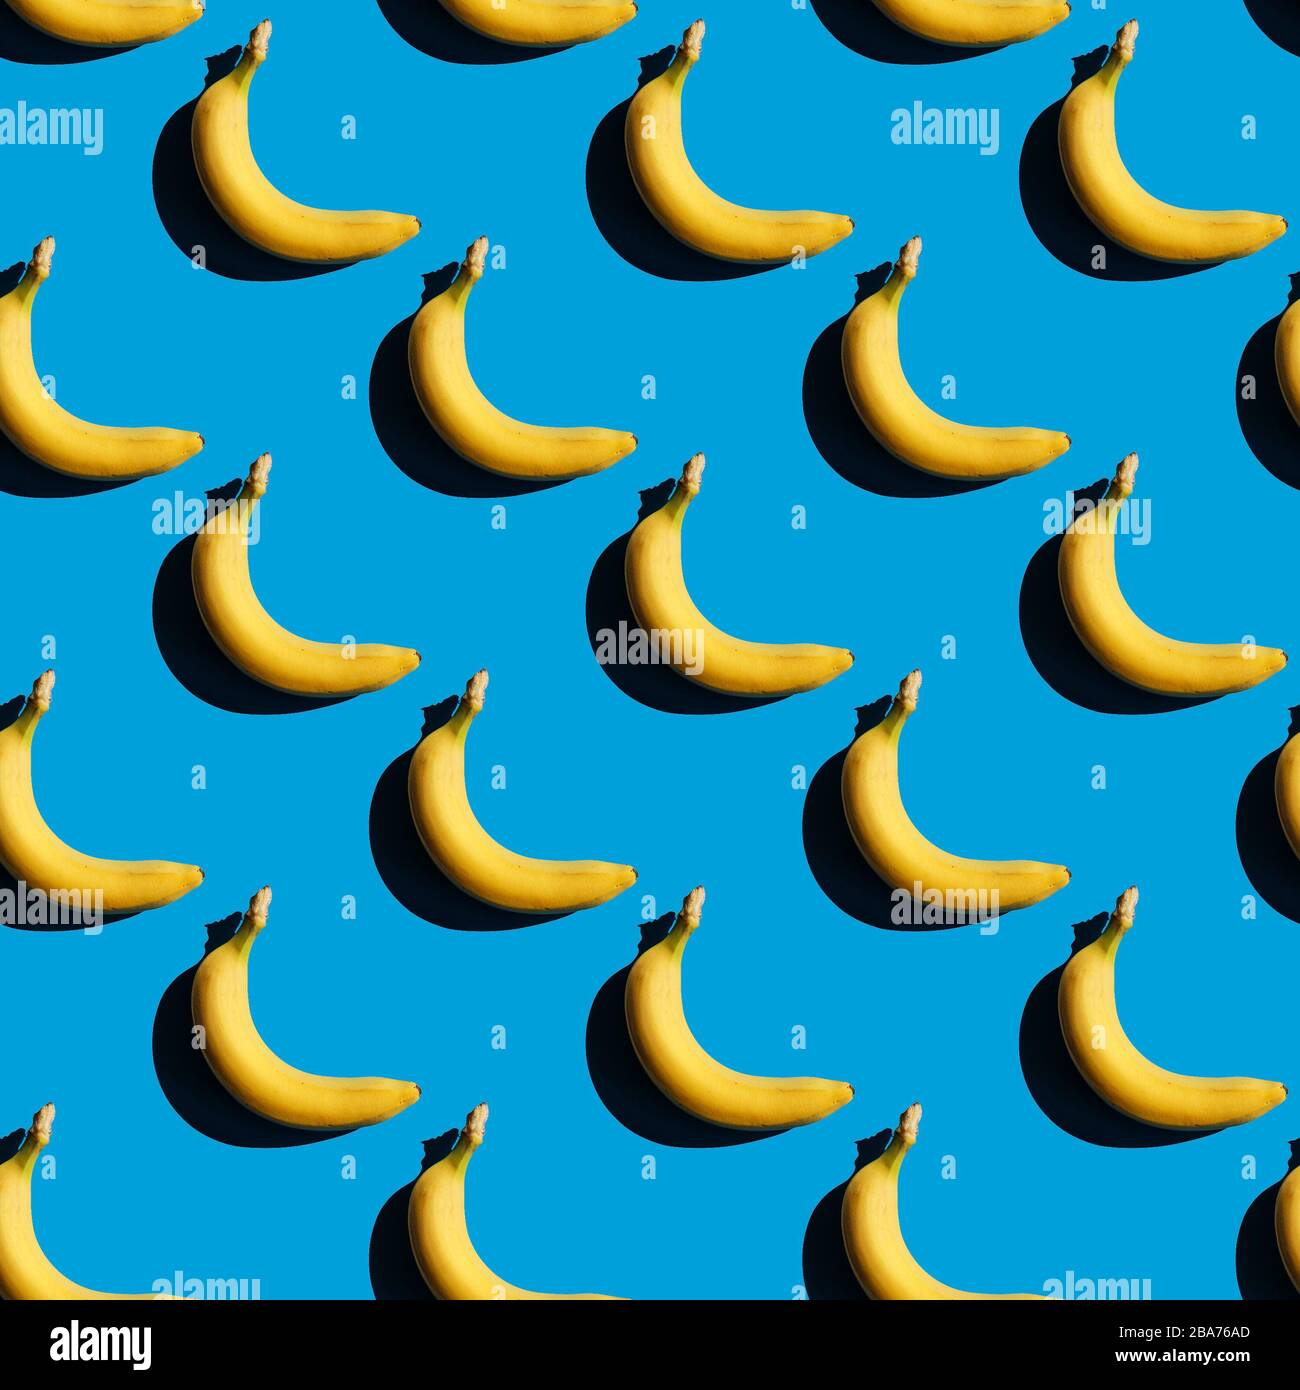 Seamless bananas pattern. Creative yellow food on blue background. Fresh season fruit texture with strong shadows Stock Photo